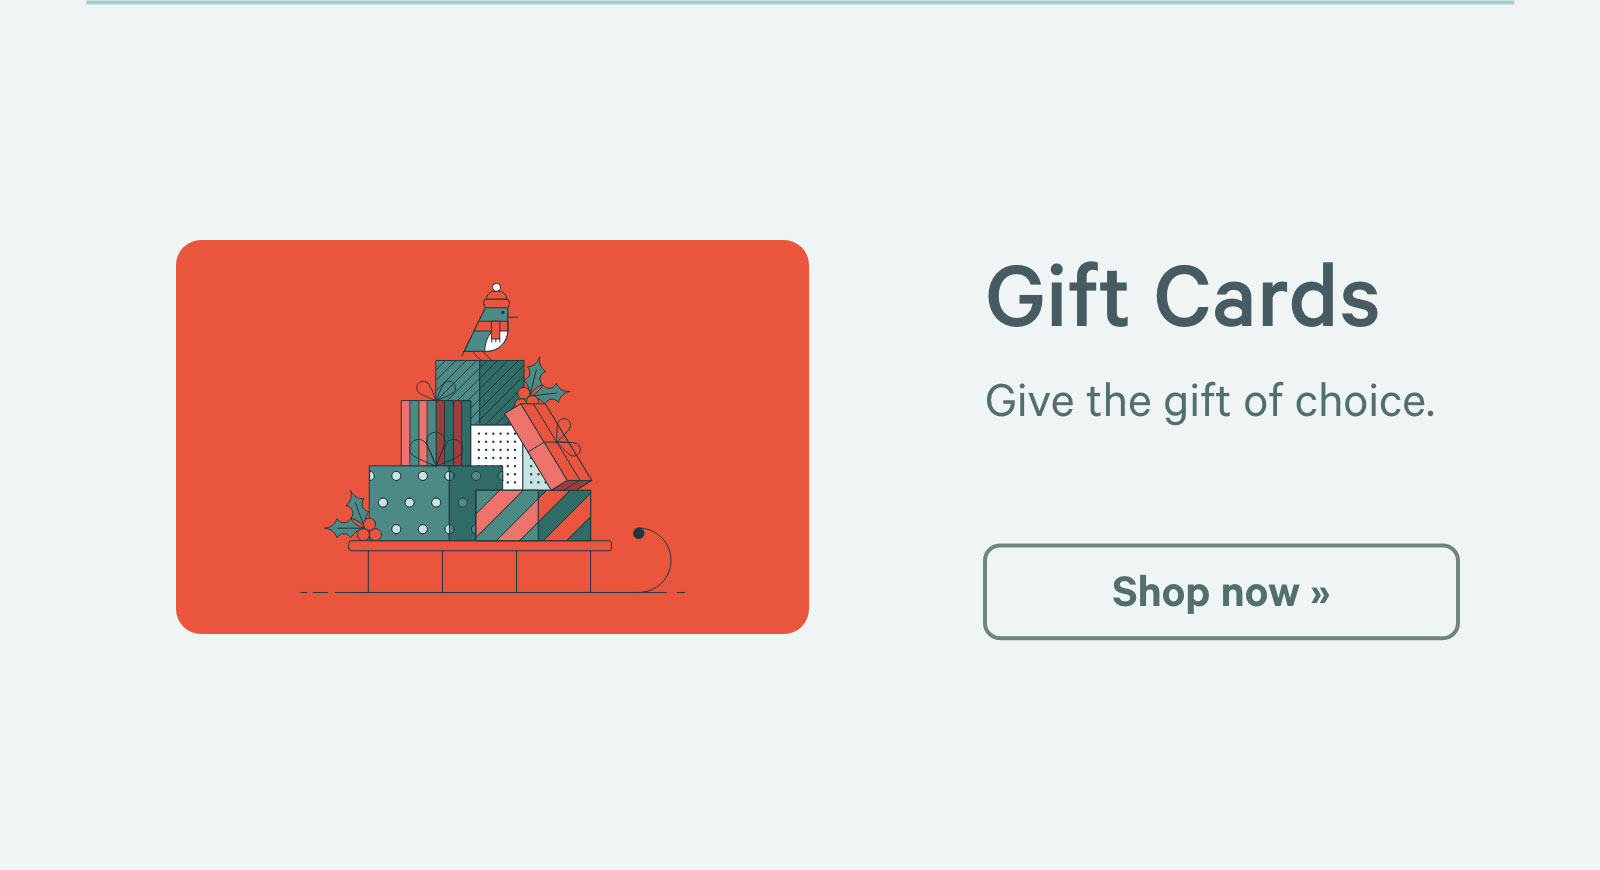 Gift Cards. Give the gift of choice. Shop now ?